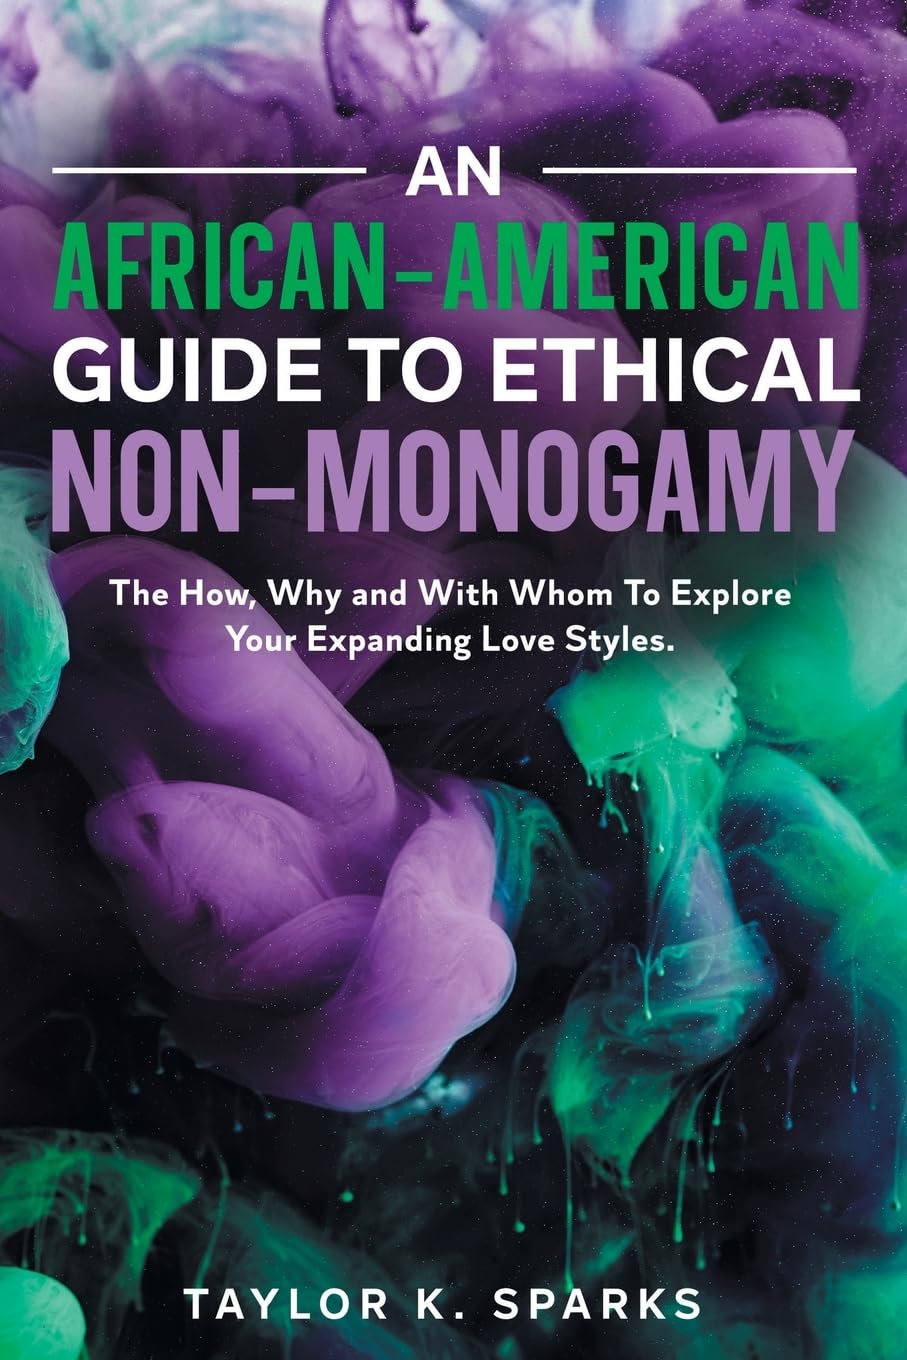 An African-American Guide To Ethical Non-Monogamy The How, Why and With Whom To Explore Your Expanding Love Styles